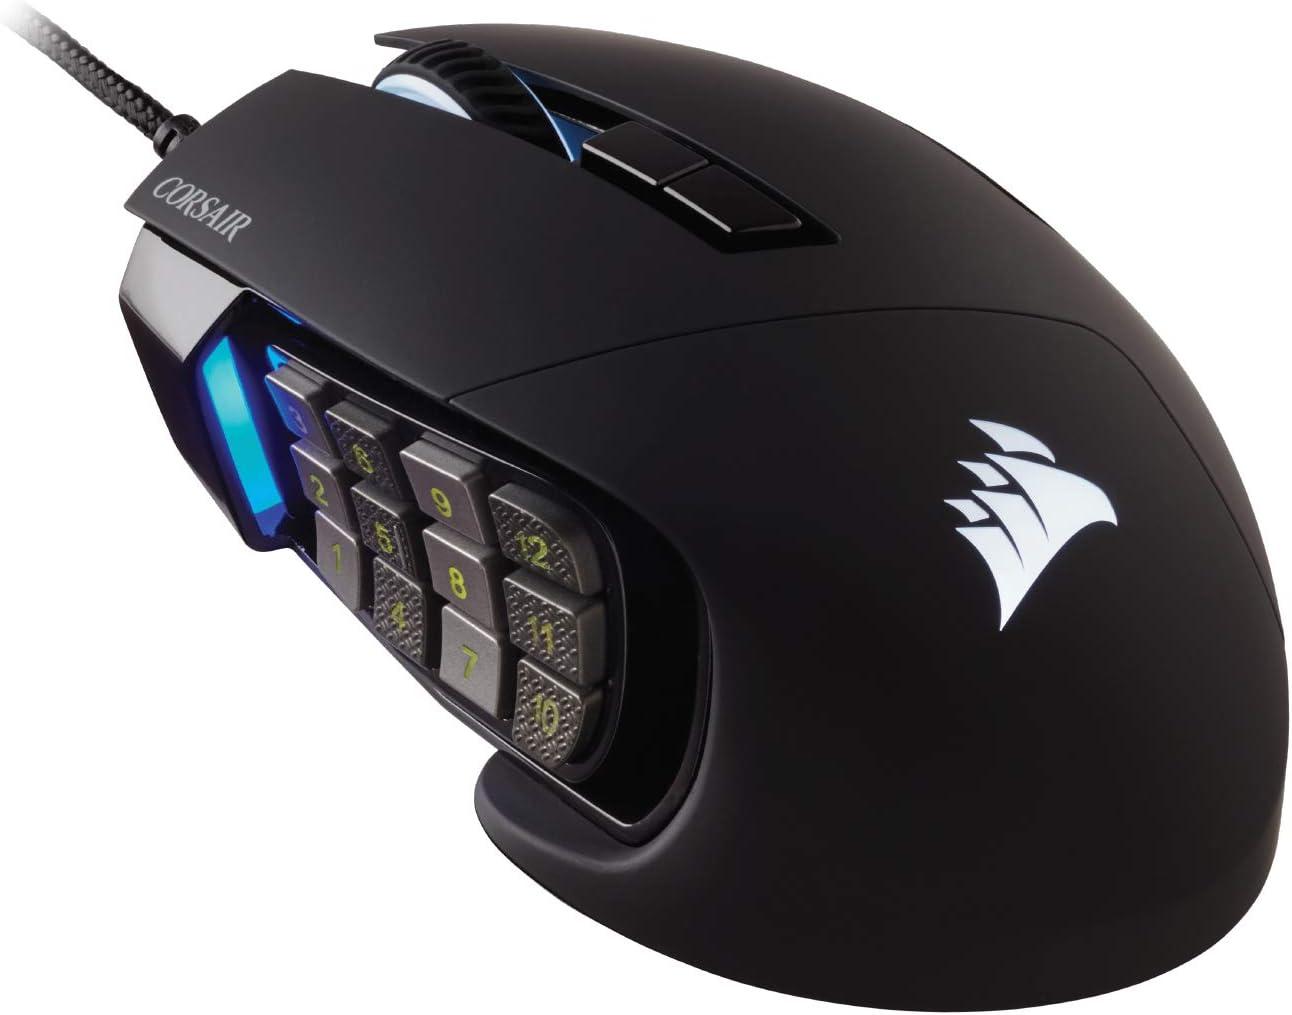 Corsair Scimitar RGB Elite Gaming Mouse for MOBA MMO for $49.99 Shipped